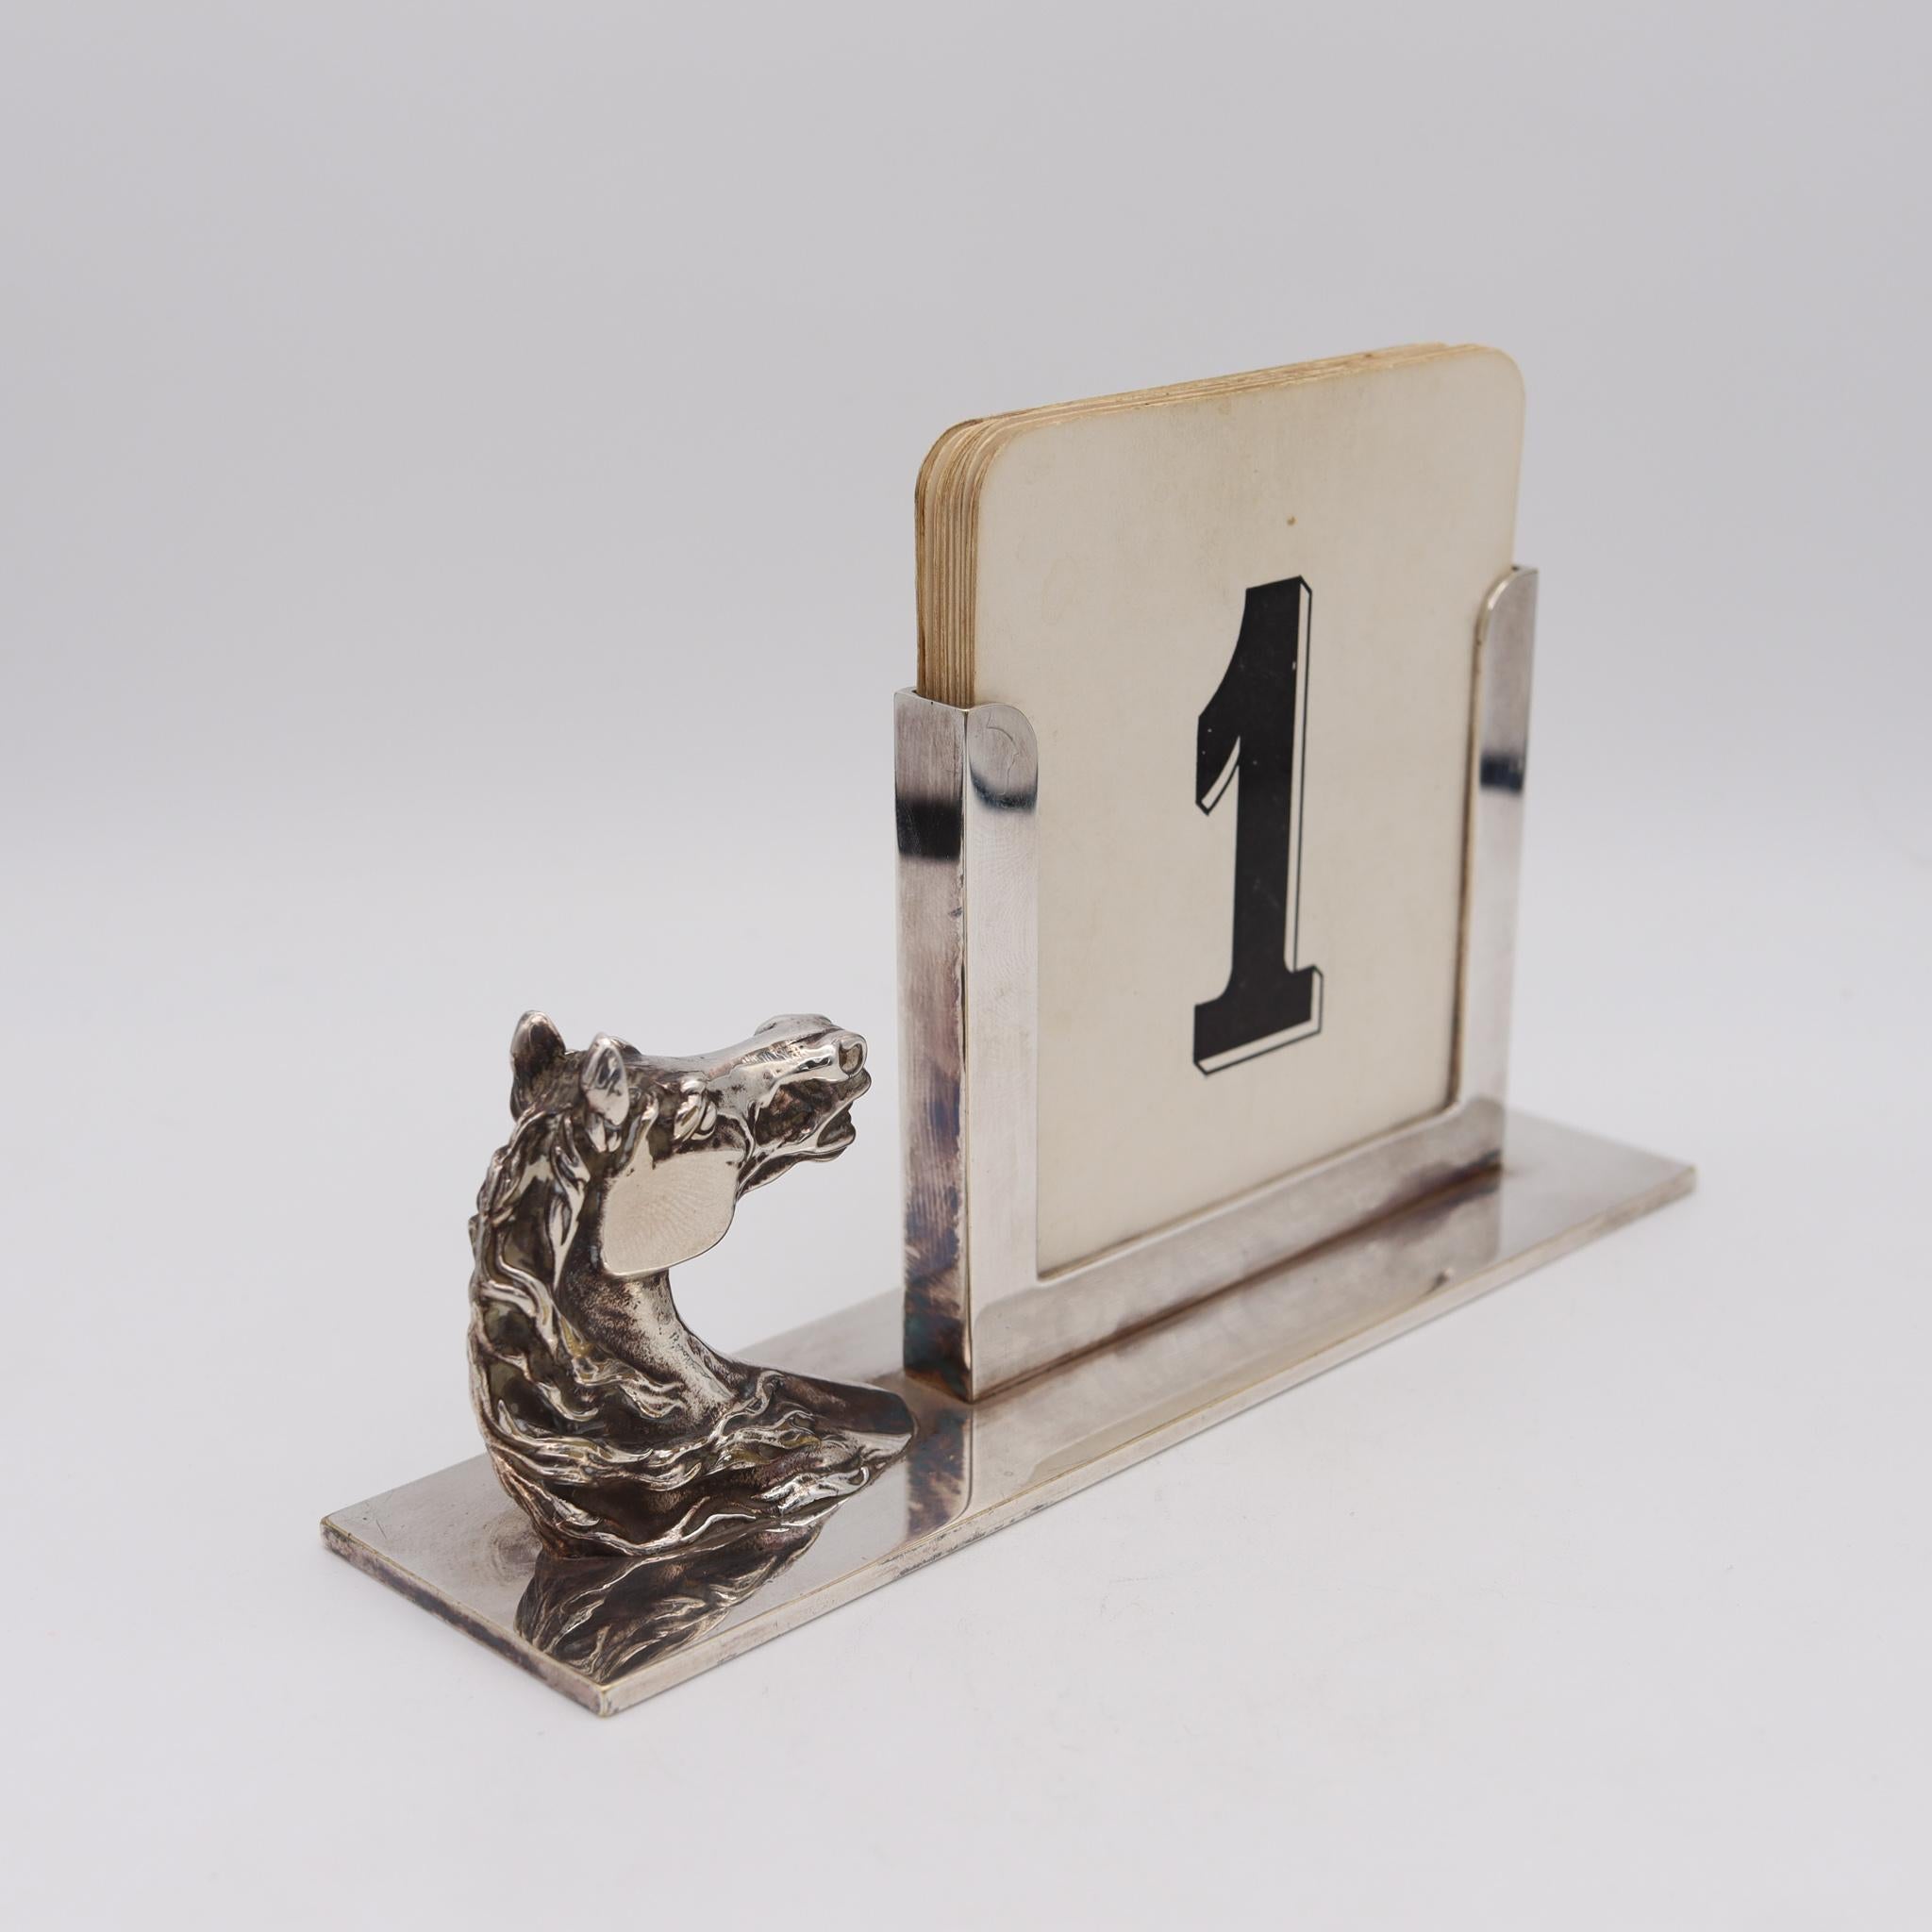 Desk calendar set designed by Hermes.

Fabulous and highly decorative piece, created in Paris, France by the house of Hermes, back in the 1960. This horse-profile calendar desk set is very rare and has been carefully crafted in solid electro